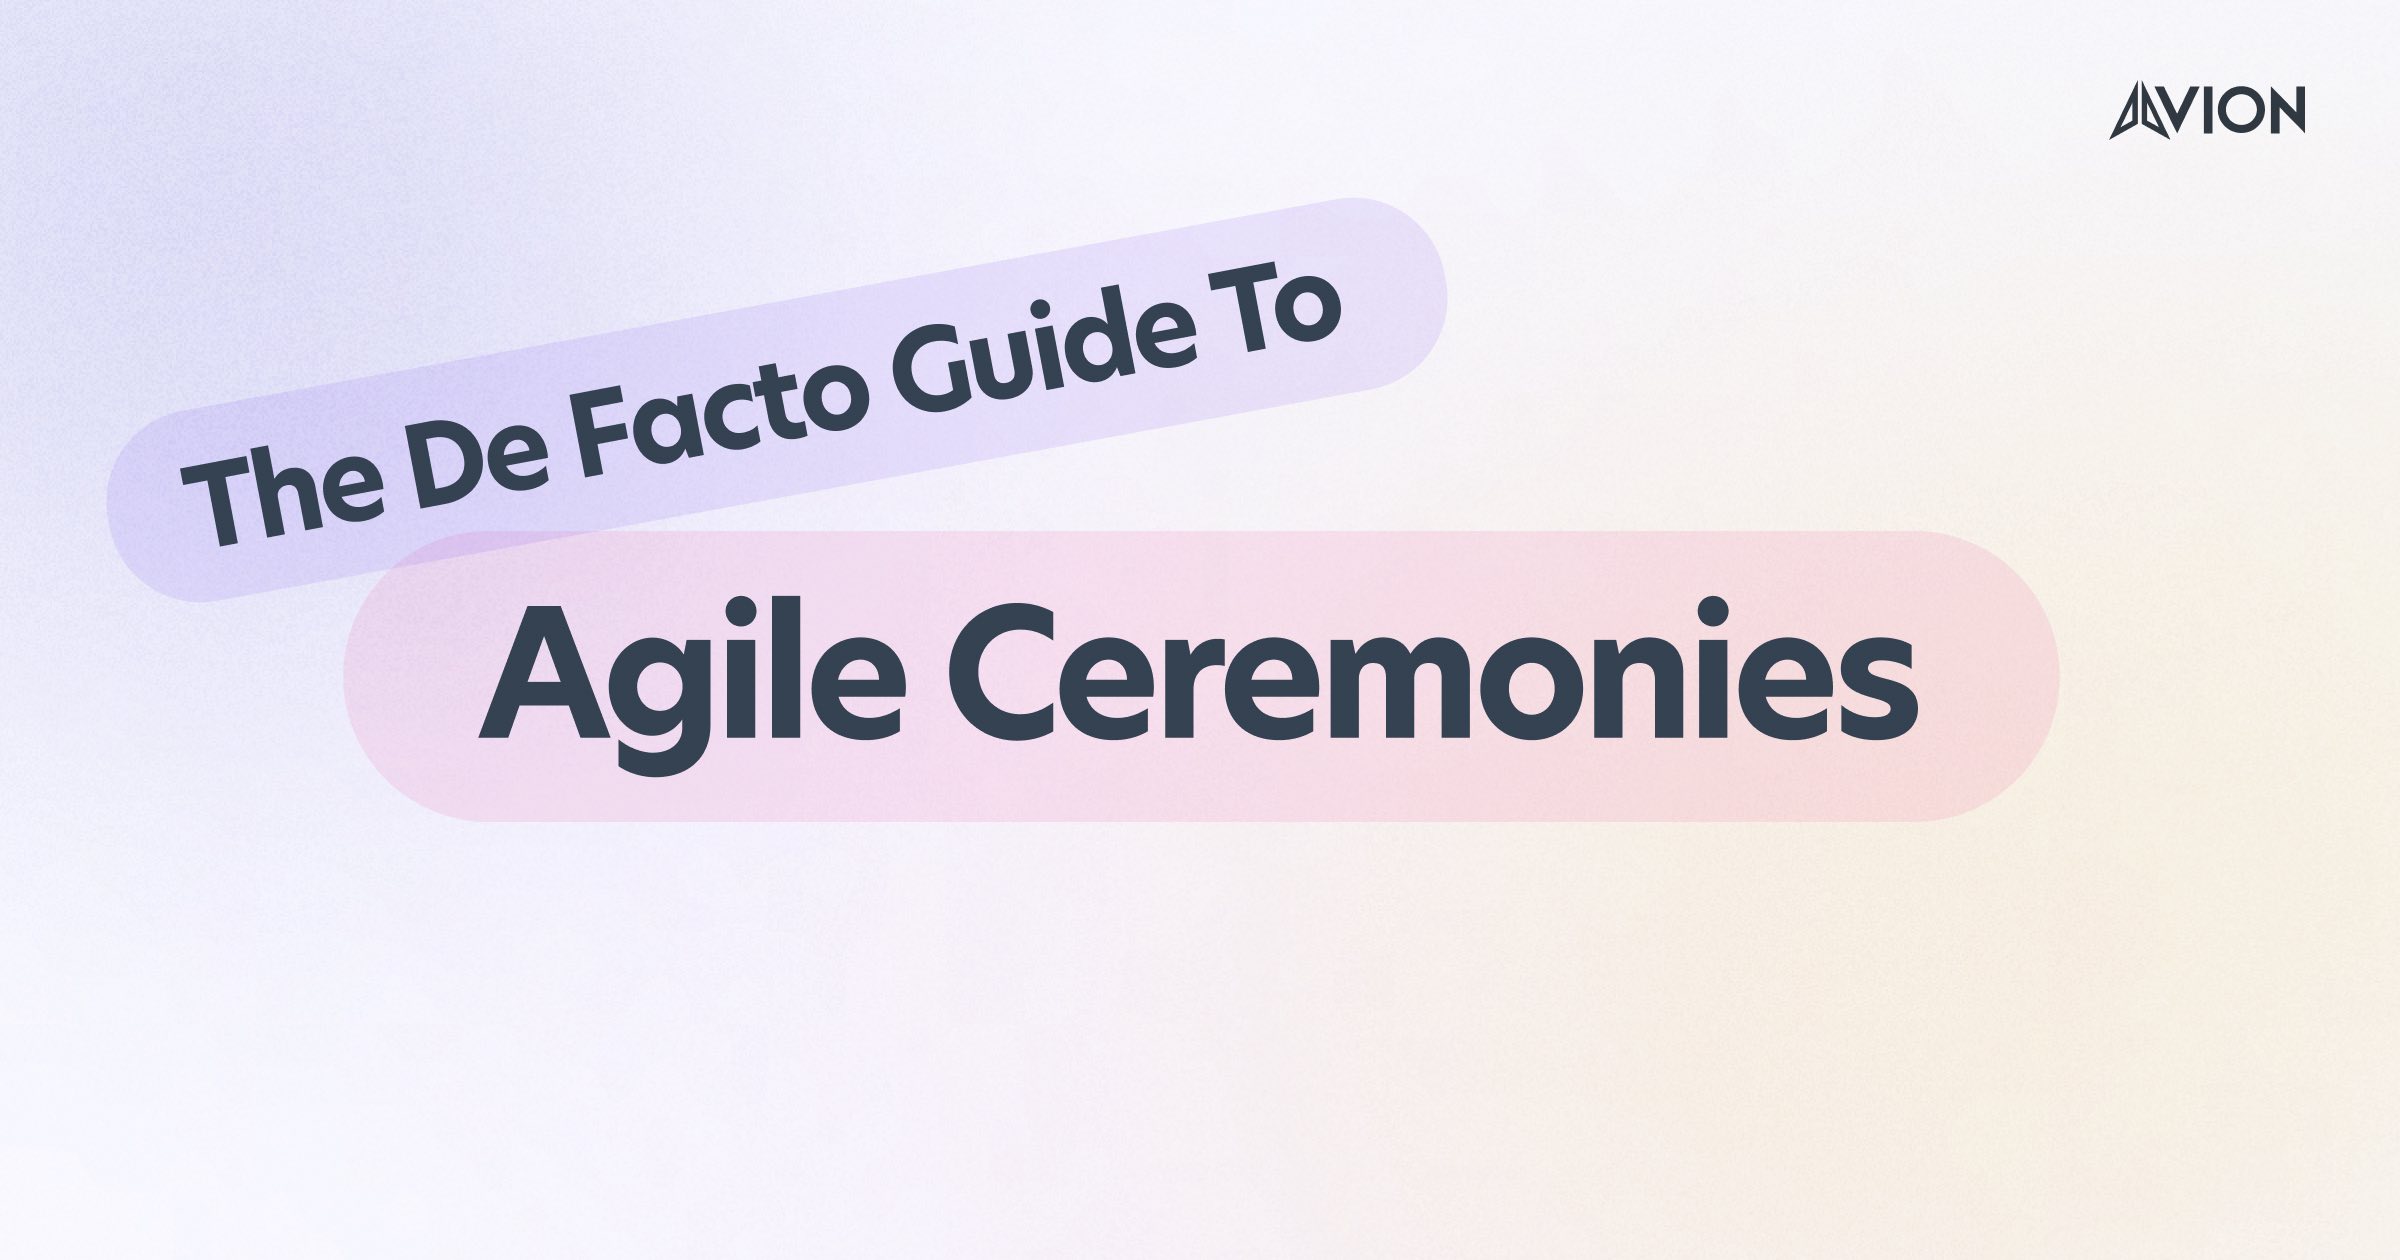 Agile ceremonies guide — compare different Agile ceremonies and learn how to get the most from them